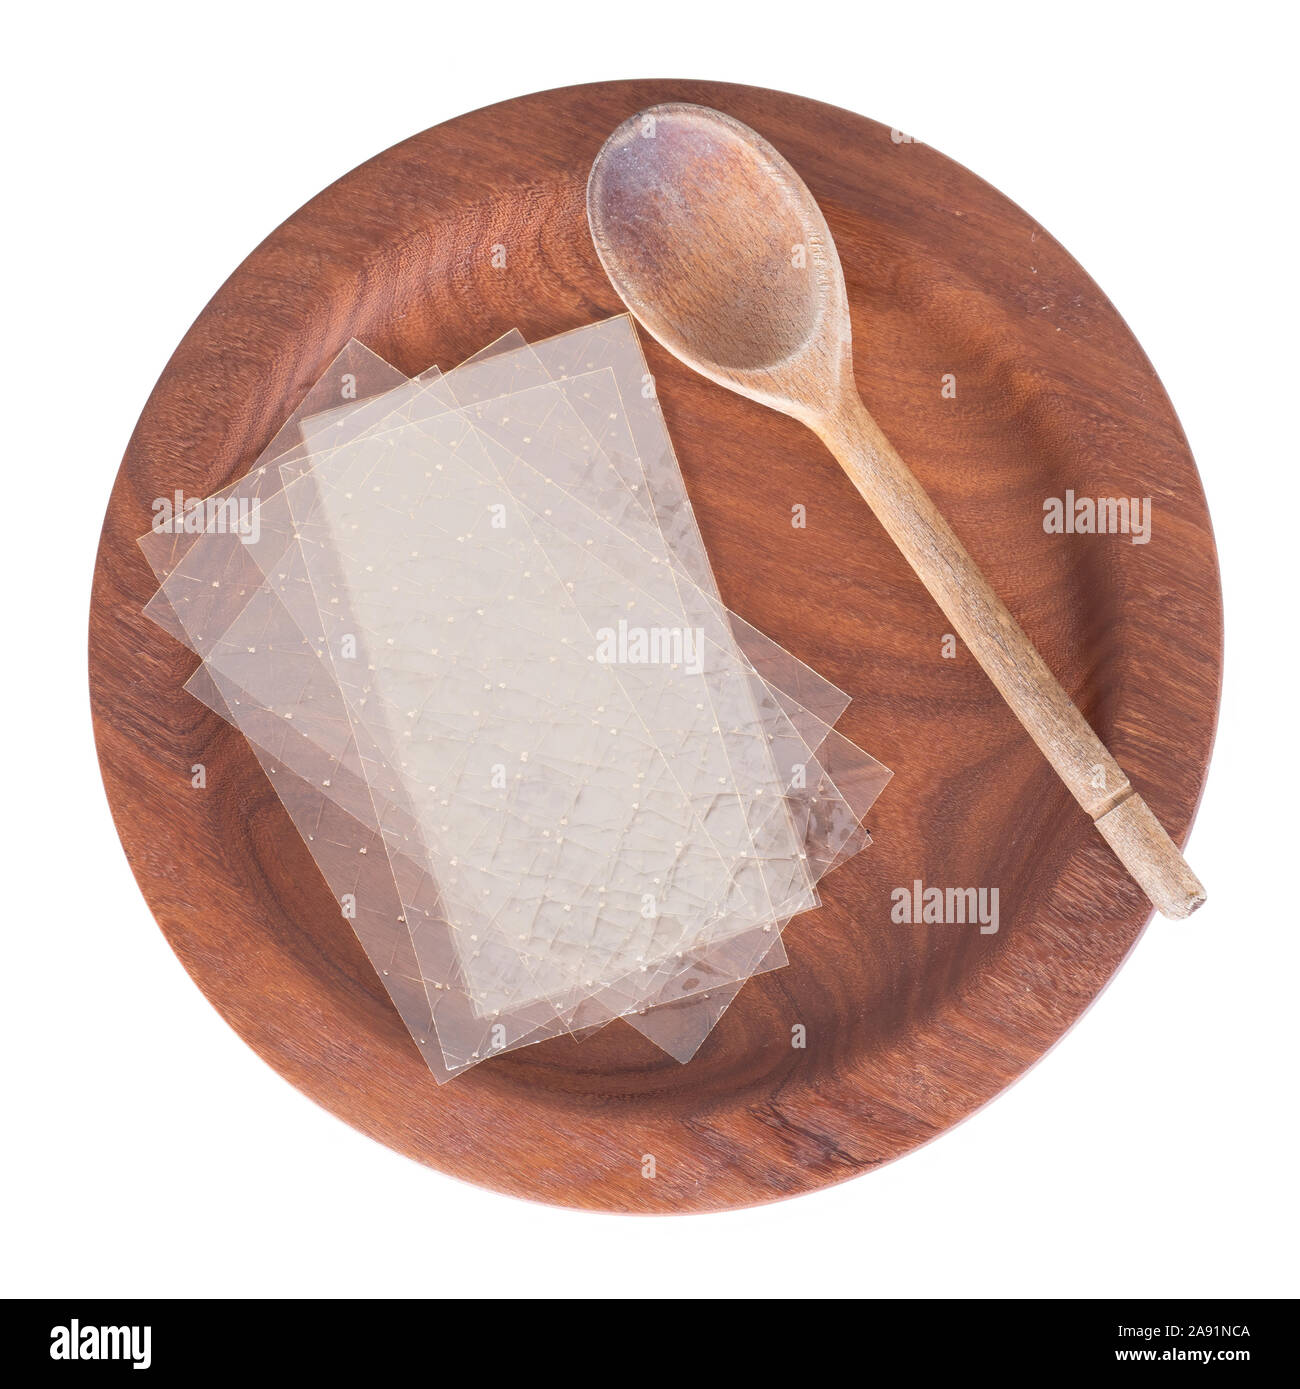 Sheets of colourless gelatin aka gelatine leaves on a wooden plate with spoon, isolated on white. Food ingredient. Stock Photo